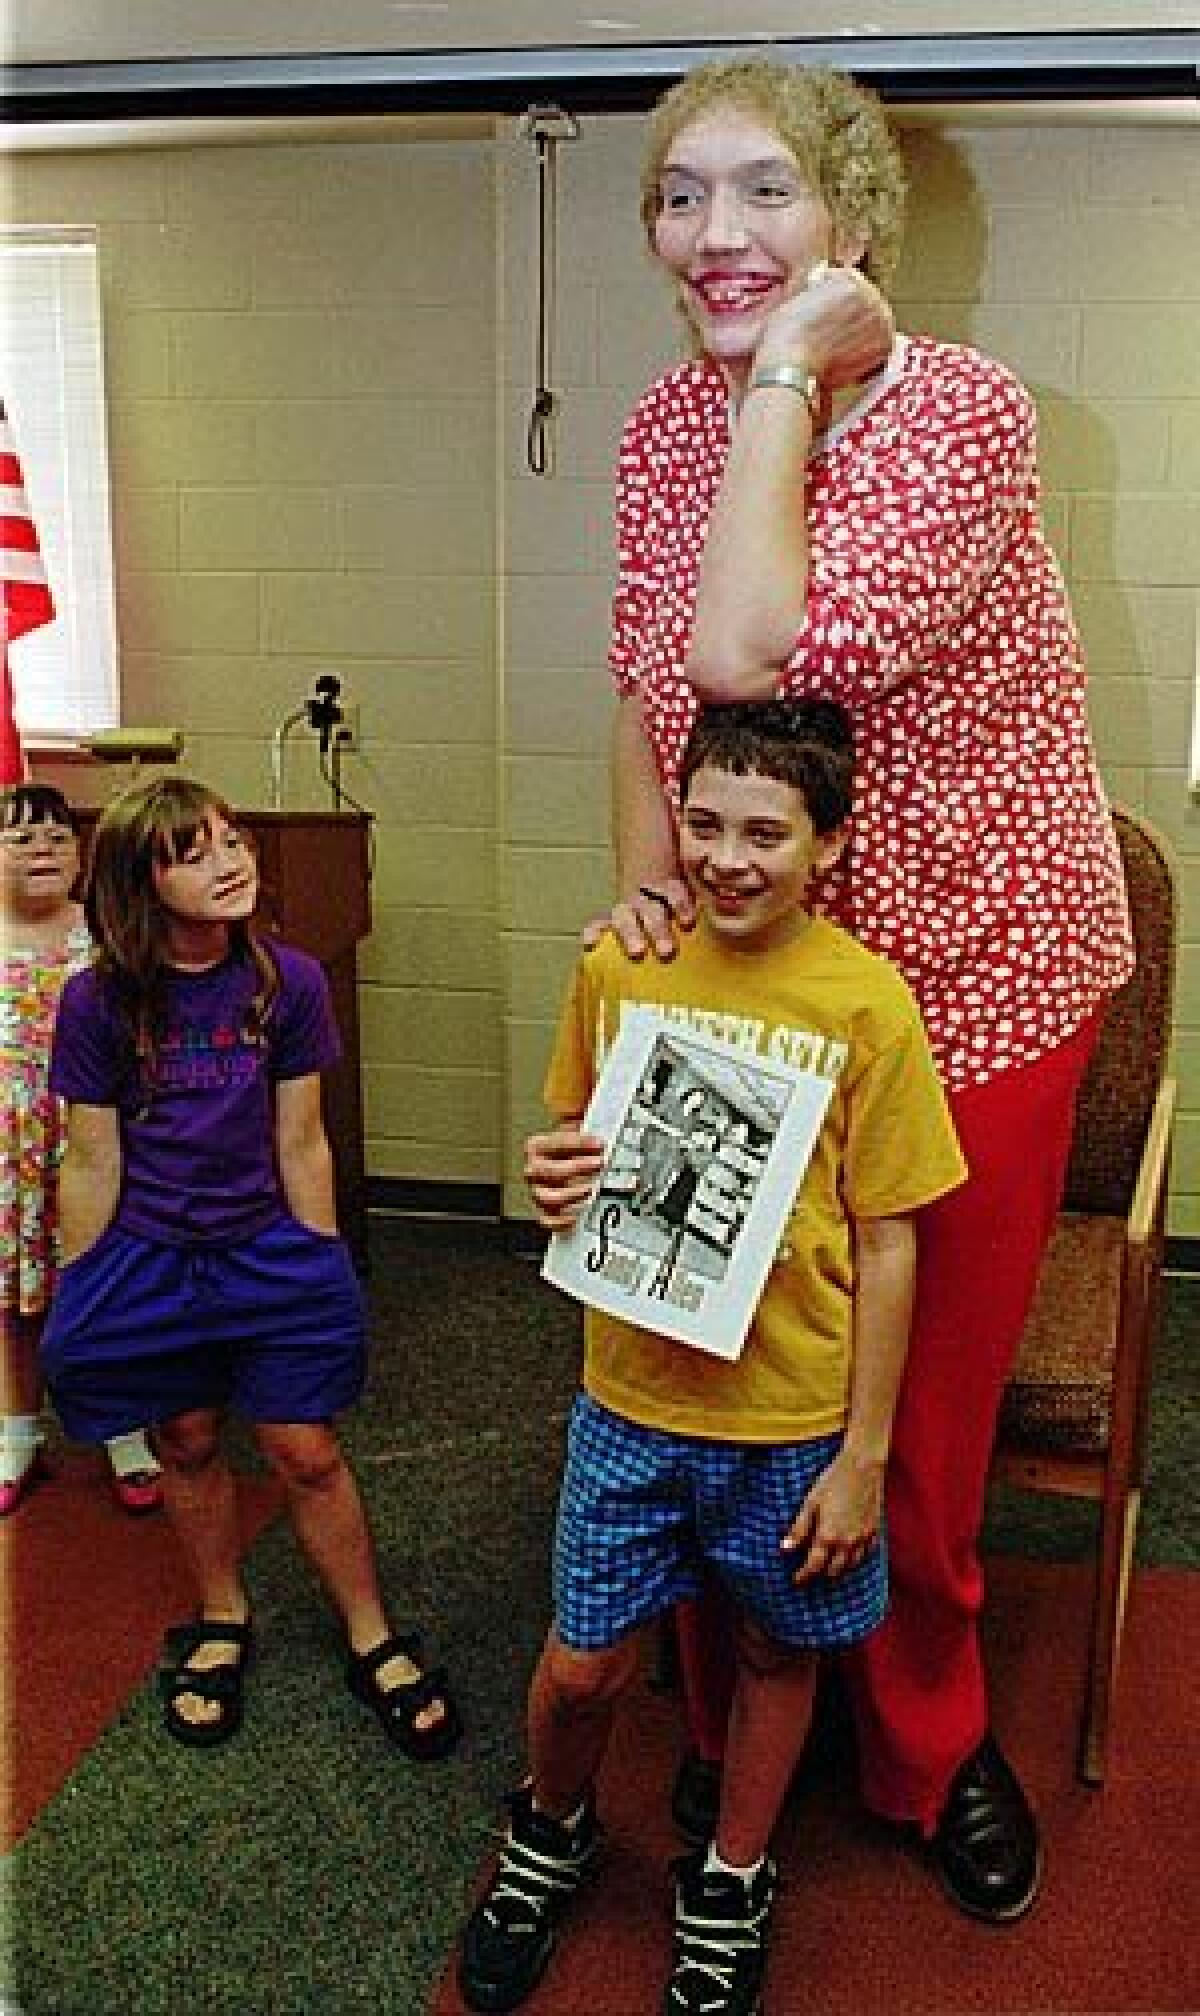 In this Sept. 2, 1995 file photo, Sandy Allen, poses for a picture with Will Denk, at the library in Shelbyville, Ind. The 7-foot-7 Allen considered the world's tallest woman died early today at a nursing home in her hometown of Shelbyville. She was 53.